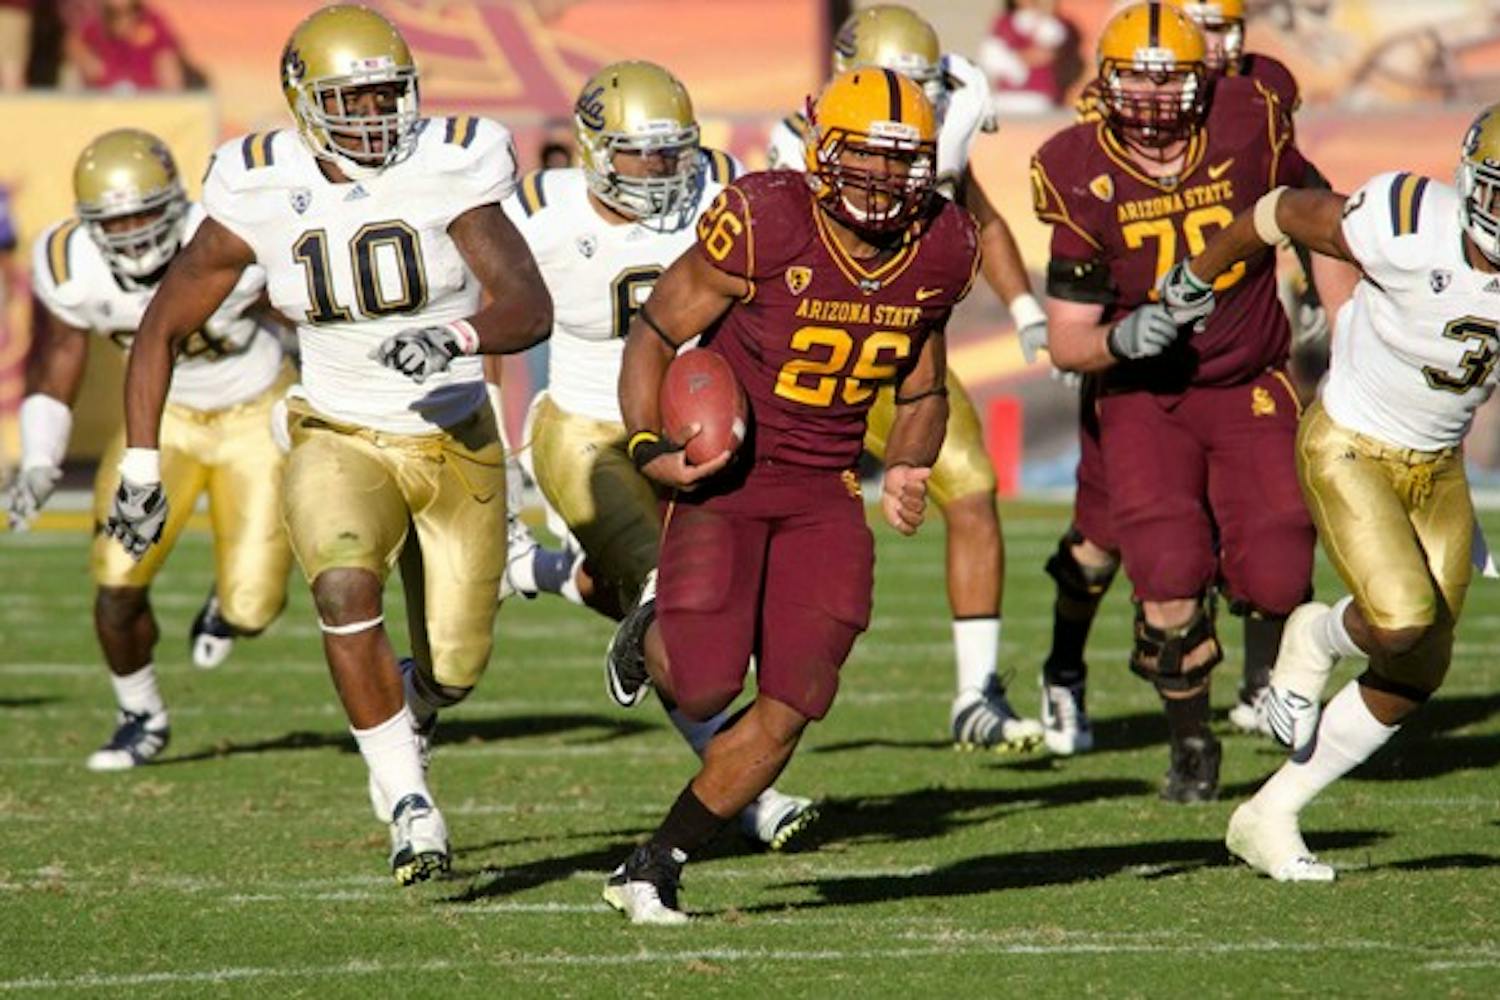 Title game awaits: ASU junior running back Cameron Marshall eludes UCLA defenders during the Sun Devils’ win in November. Both ASU and the Bruins will both play in the Pac-12 South this season for the chance to play in the inaugural conference championship game. (Photo by Aaron Lavinsky)